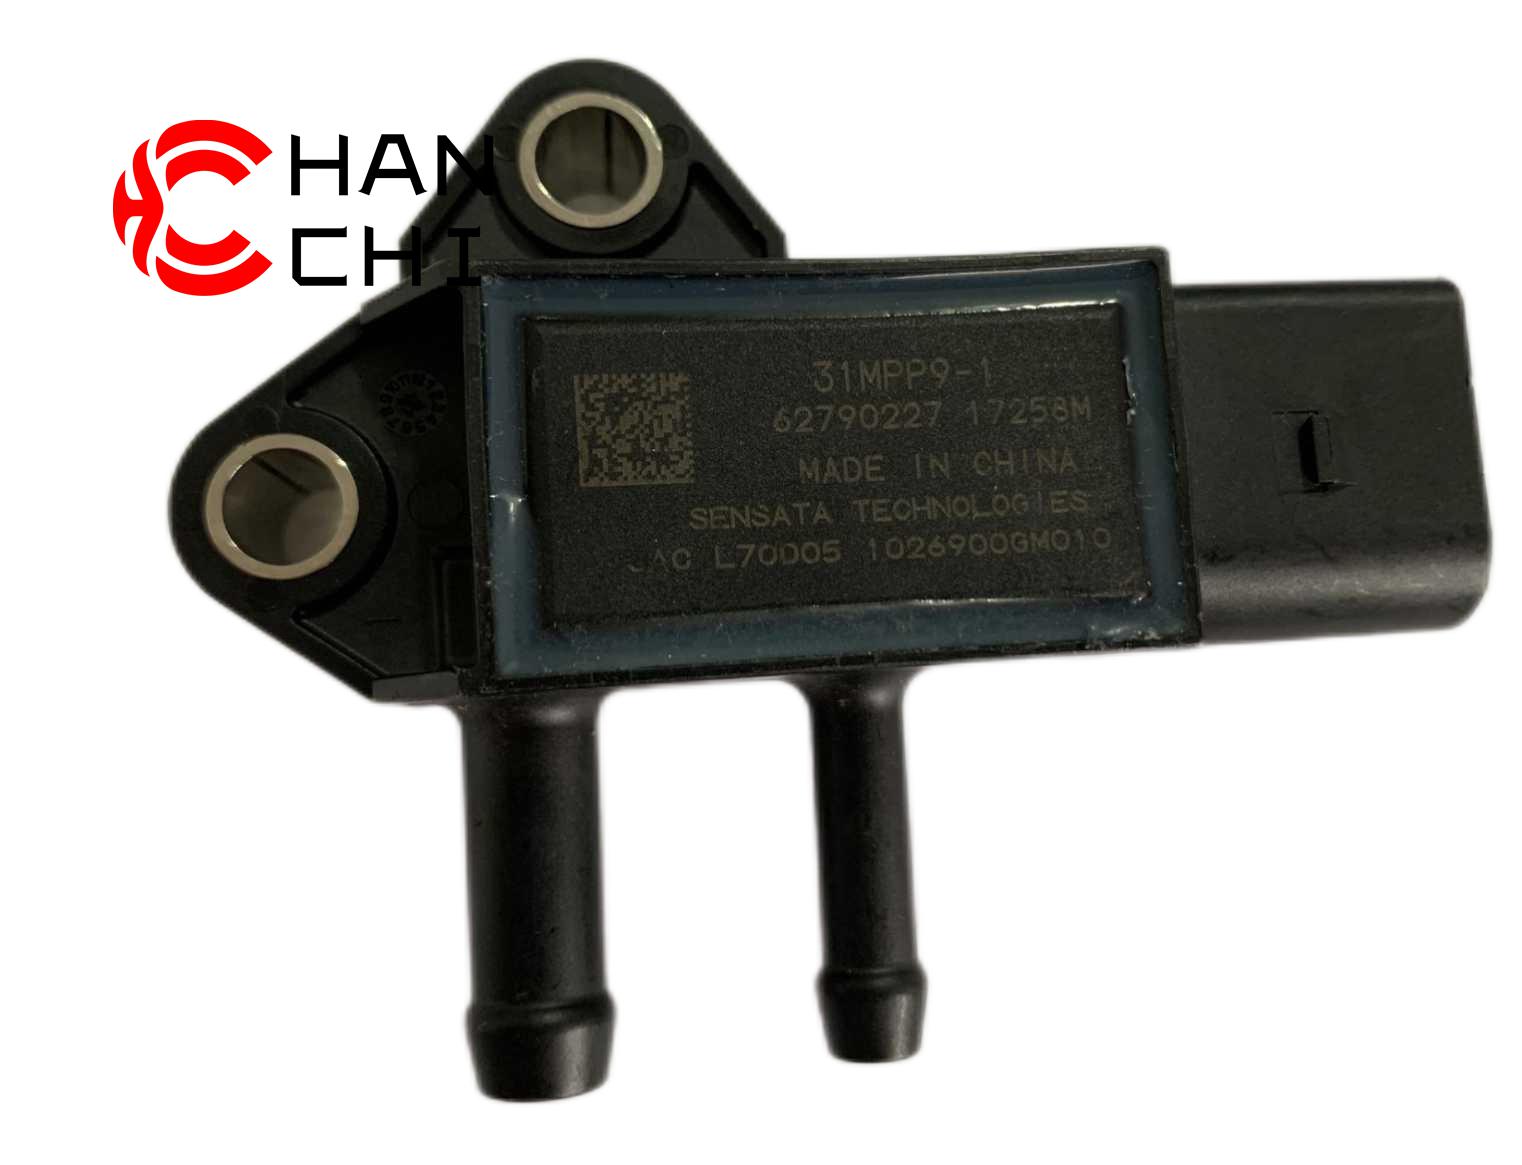 OEM: 31MPP9-1Material: ABSColor: blackOrigin: Made in ChinaWeight: 100gPacking List: 1* Diesel Particulate Filter Differential Pressure Sensor More ServiceWe can provide OEM Manufacturing serviceWe can Be your one-step solution for Auto PartsWe can provide technical scheme for you Feel Free to Contact Us, We will get back to you as soon as possible.